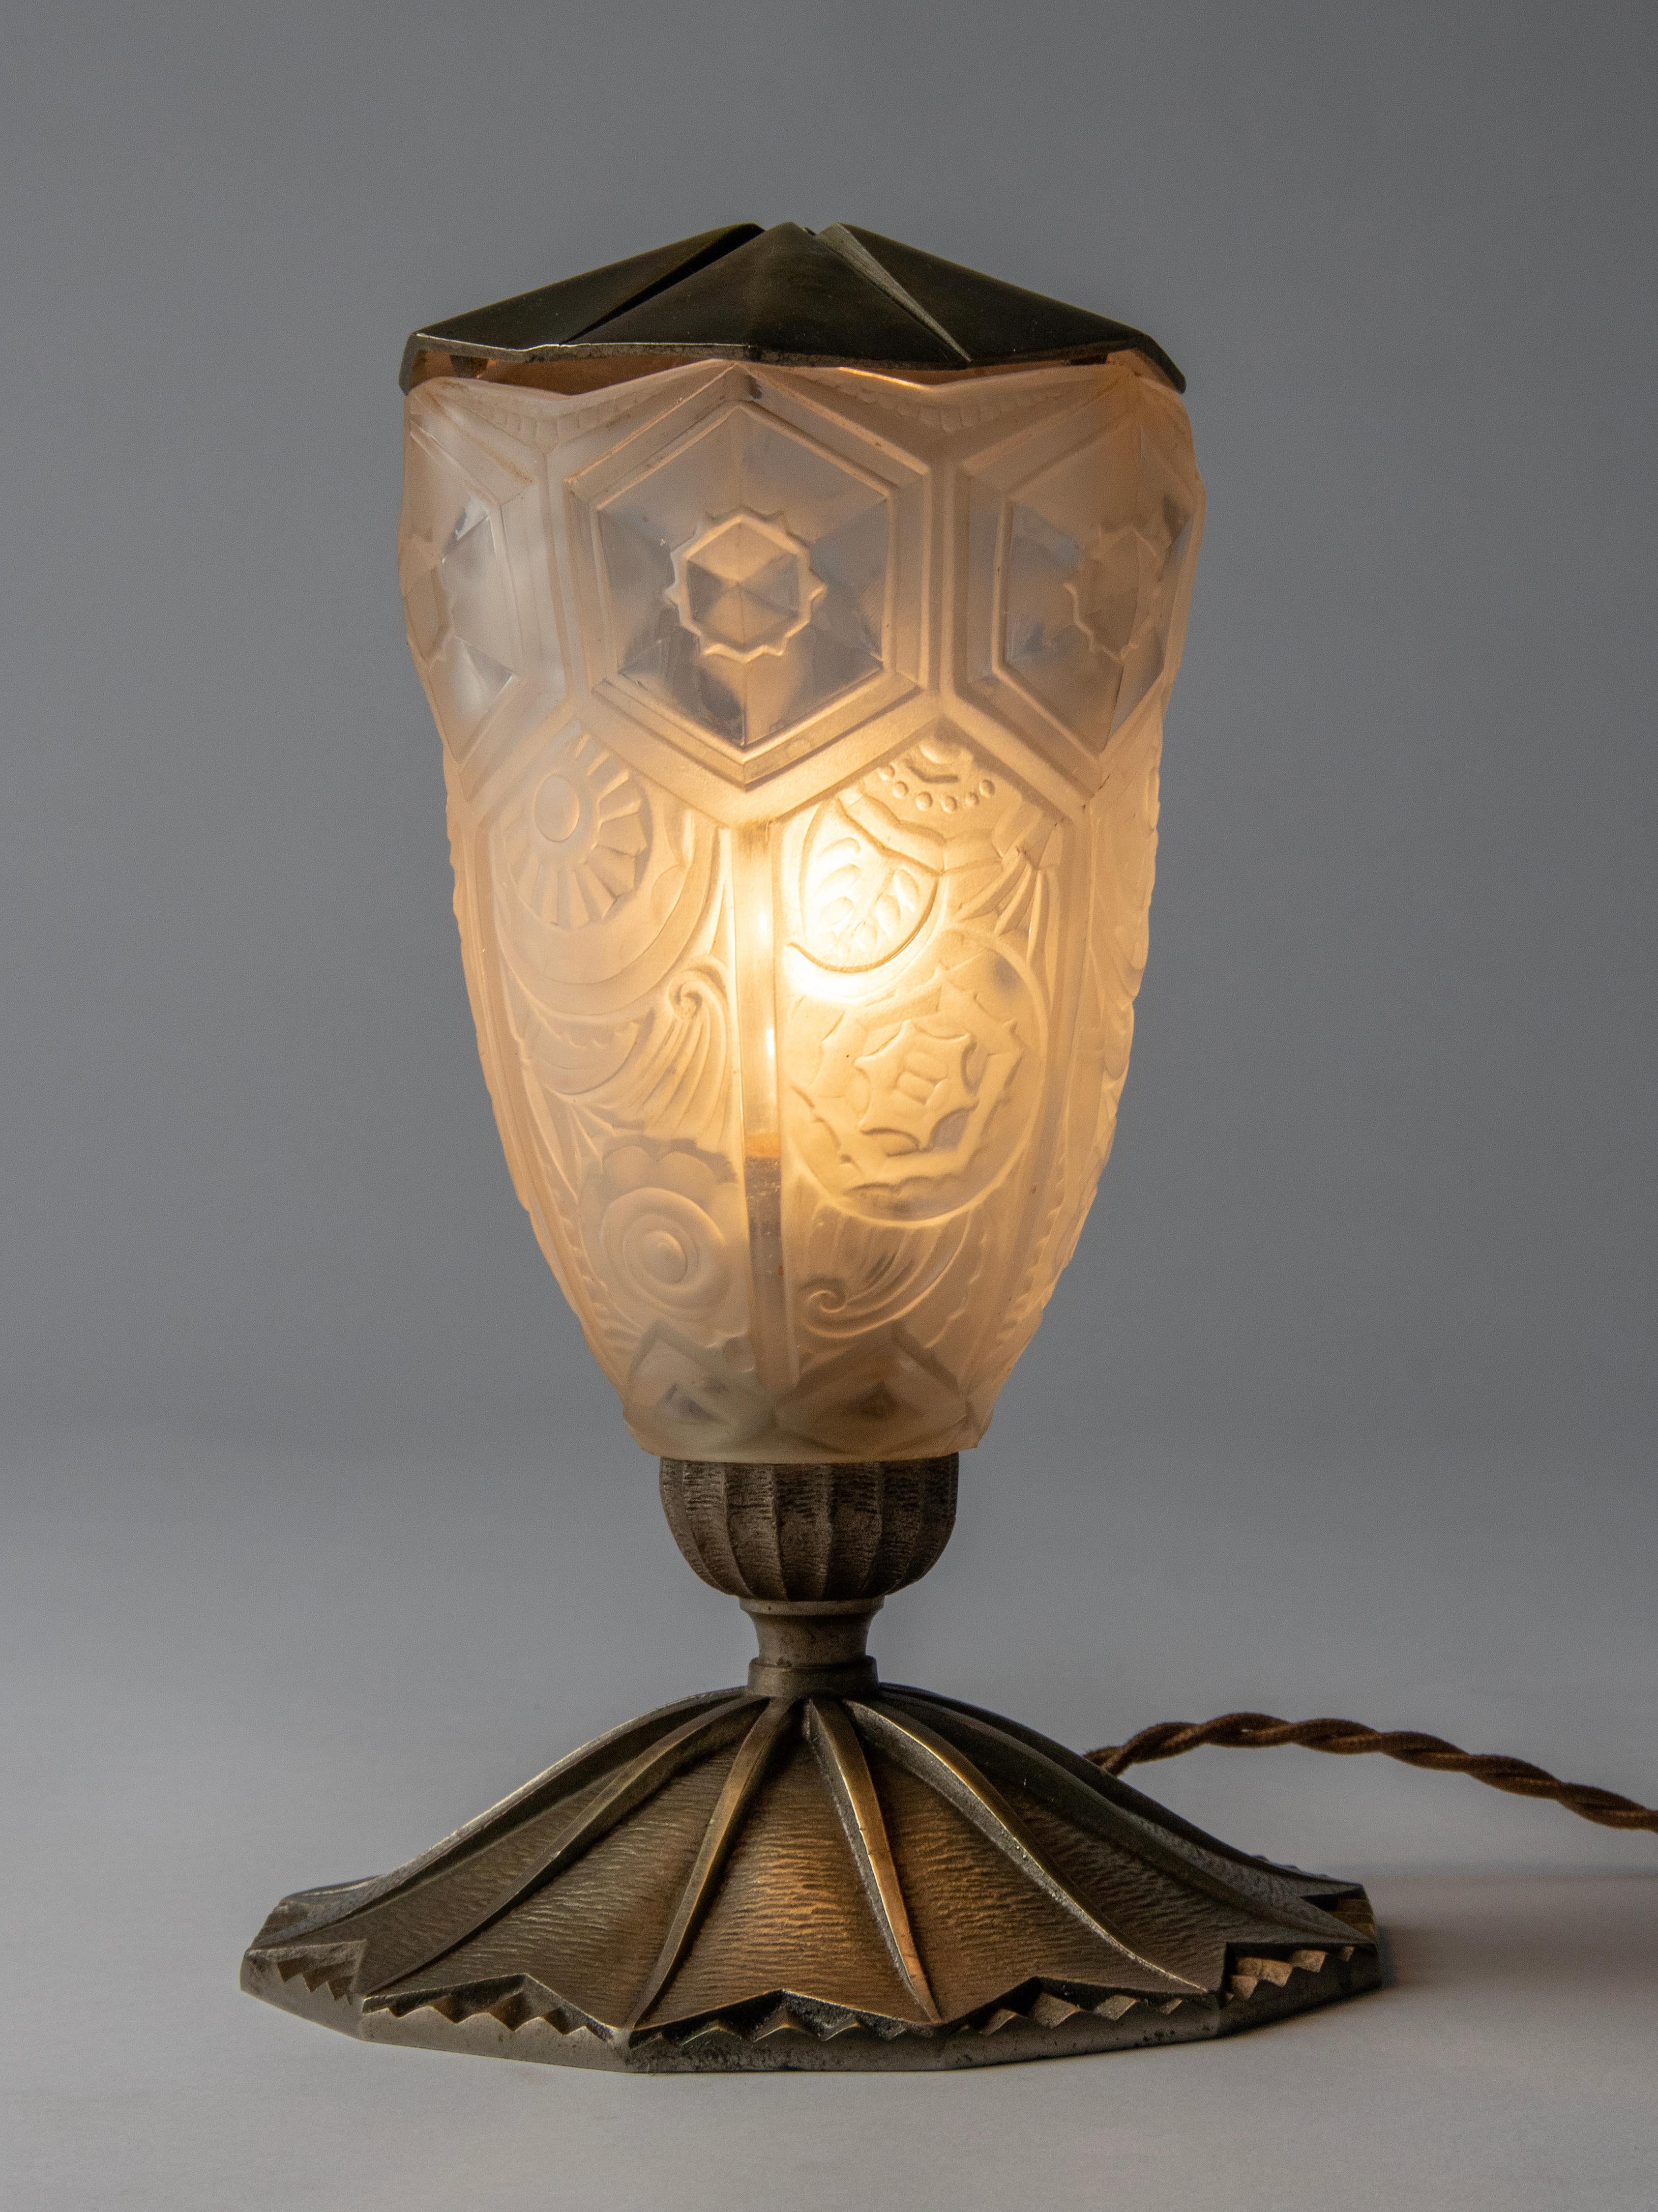 A stylish Art Deco table lamp from the French Art Deco period. The foot and lid are made of nickel-plated brass. Lamp shade is made of clear frosted molded glass shade with floral motifs.
The lamp is in working order, it has the original wiring,